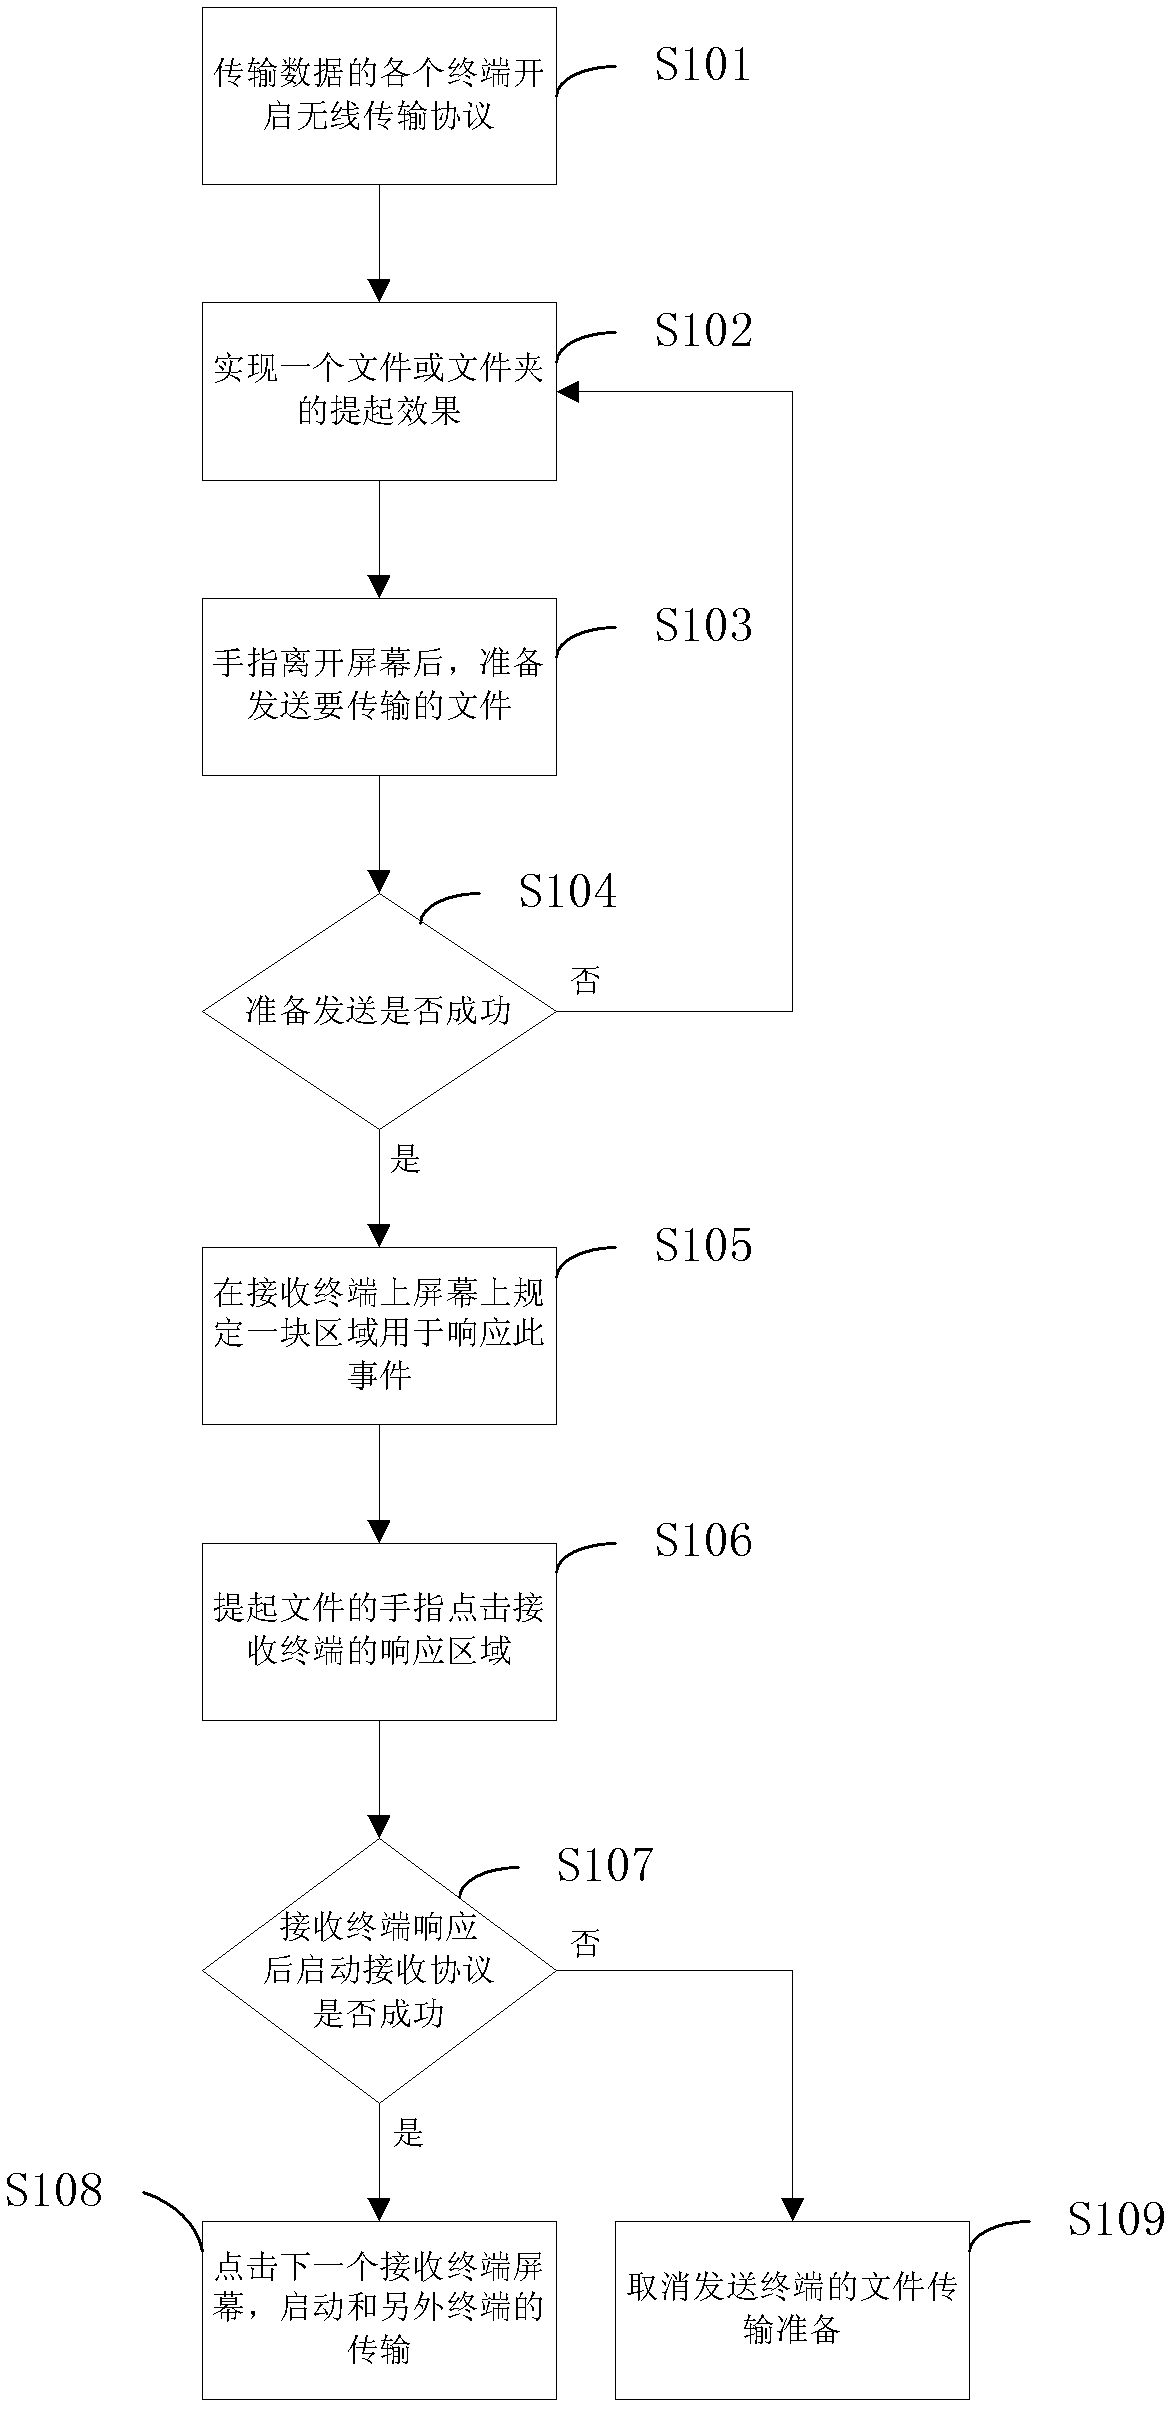 Method for transferring files among terminals